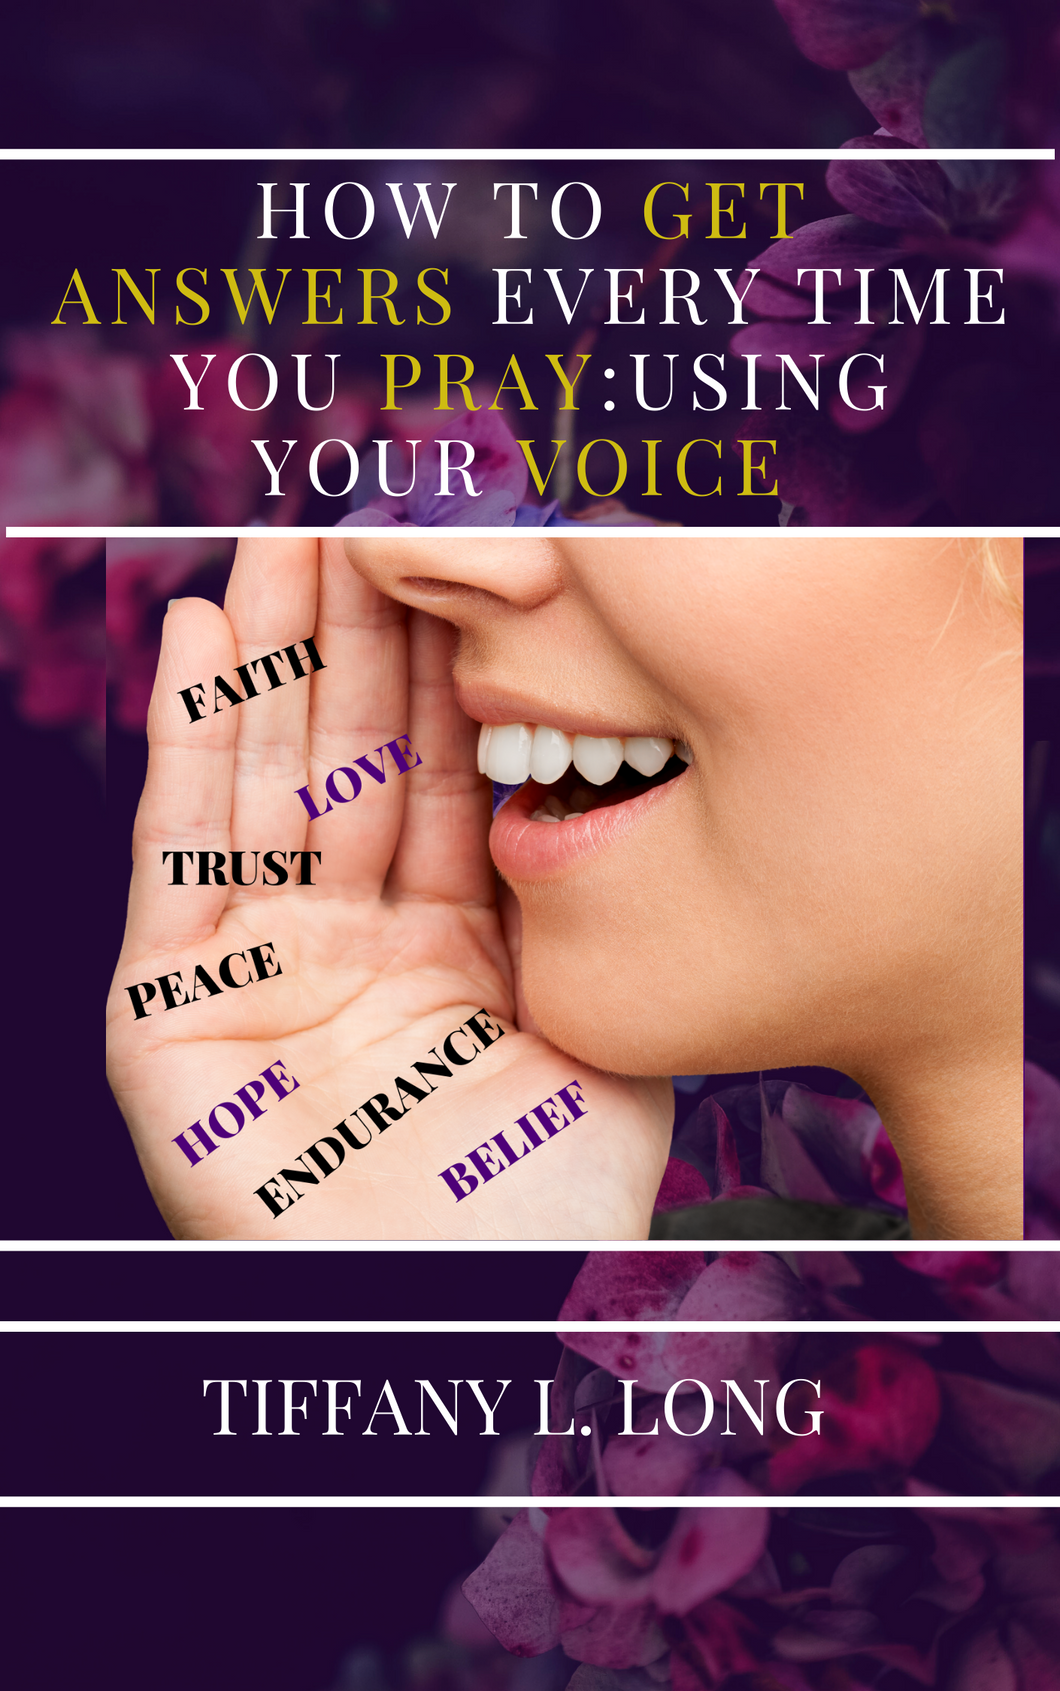 How to Get Answers Every Time You Pray... Using Your Voice